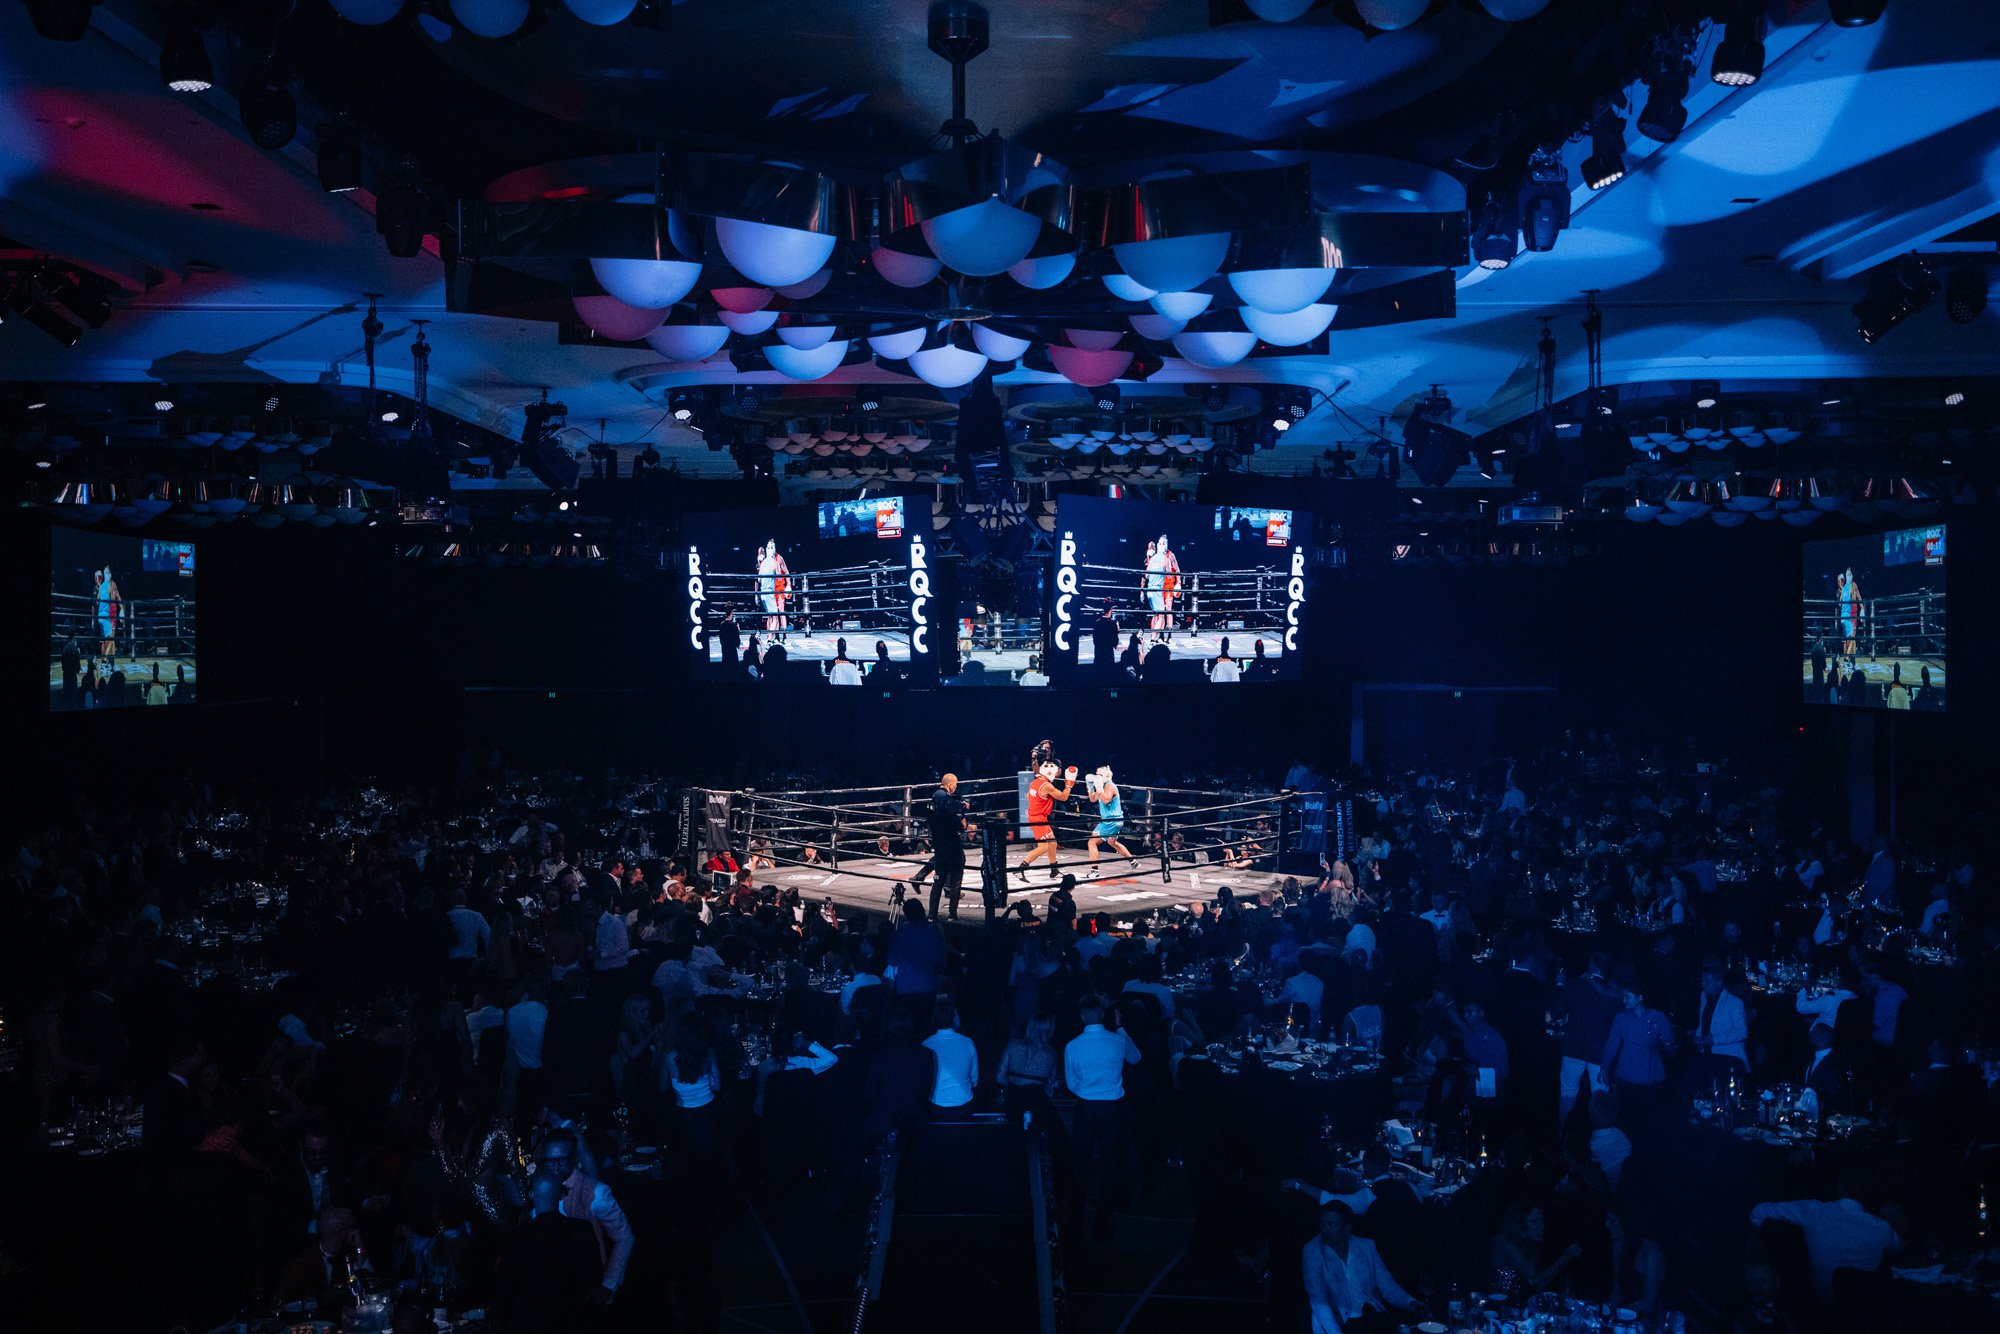 a ballroom with boxing ring in the middle under lights